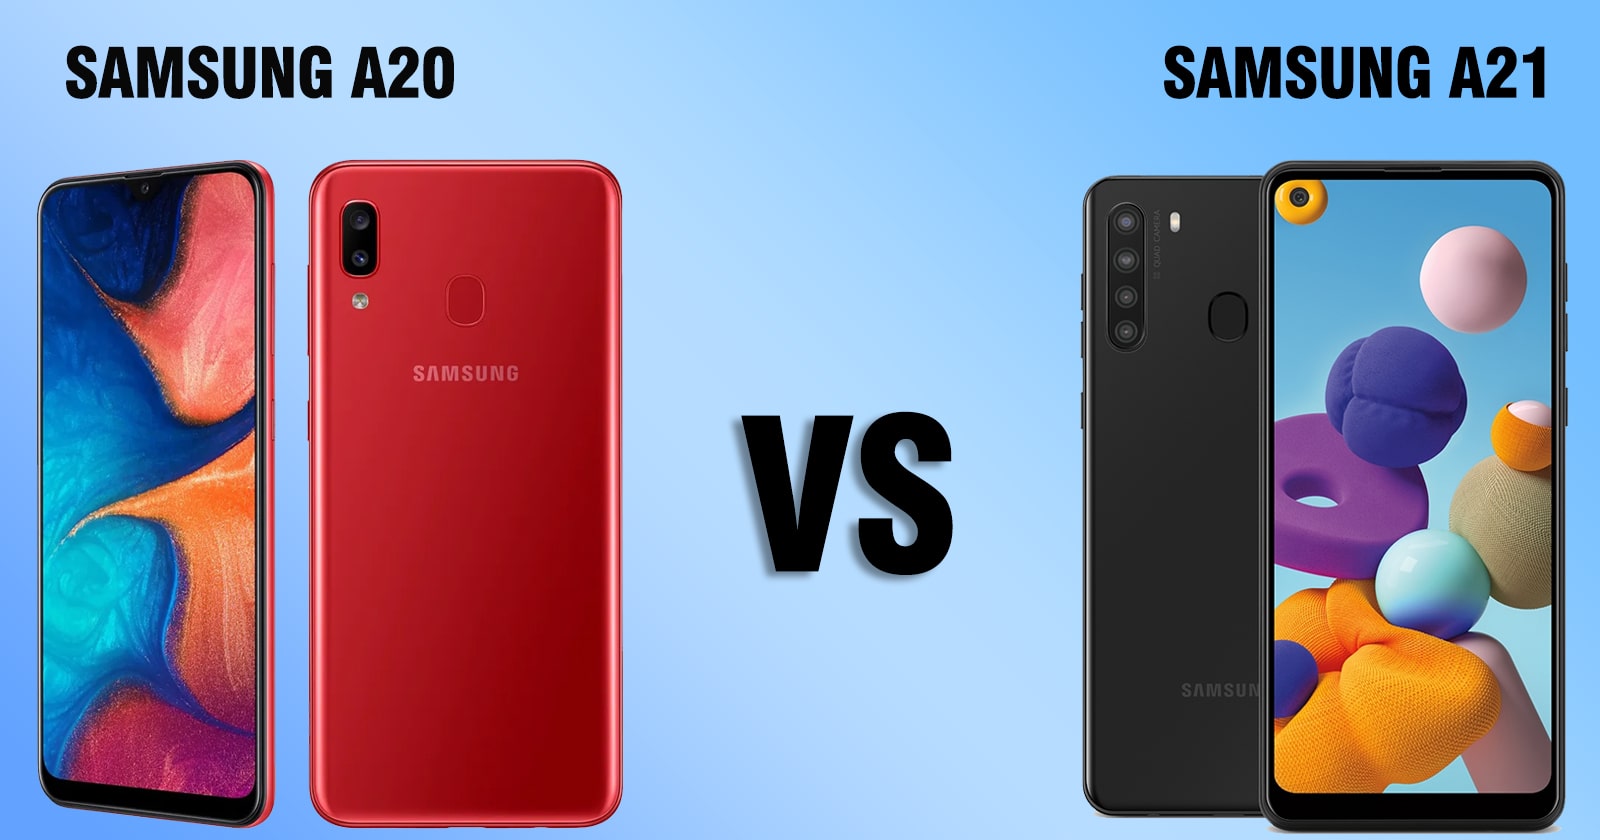 What Is the Difference Between Samsung A20 and A21